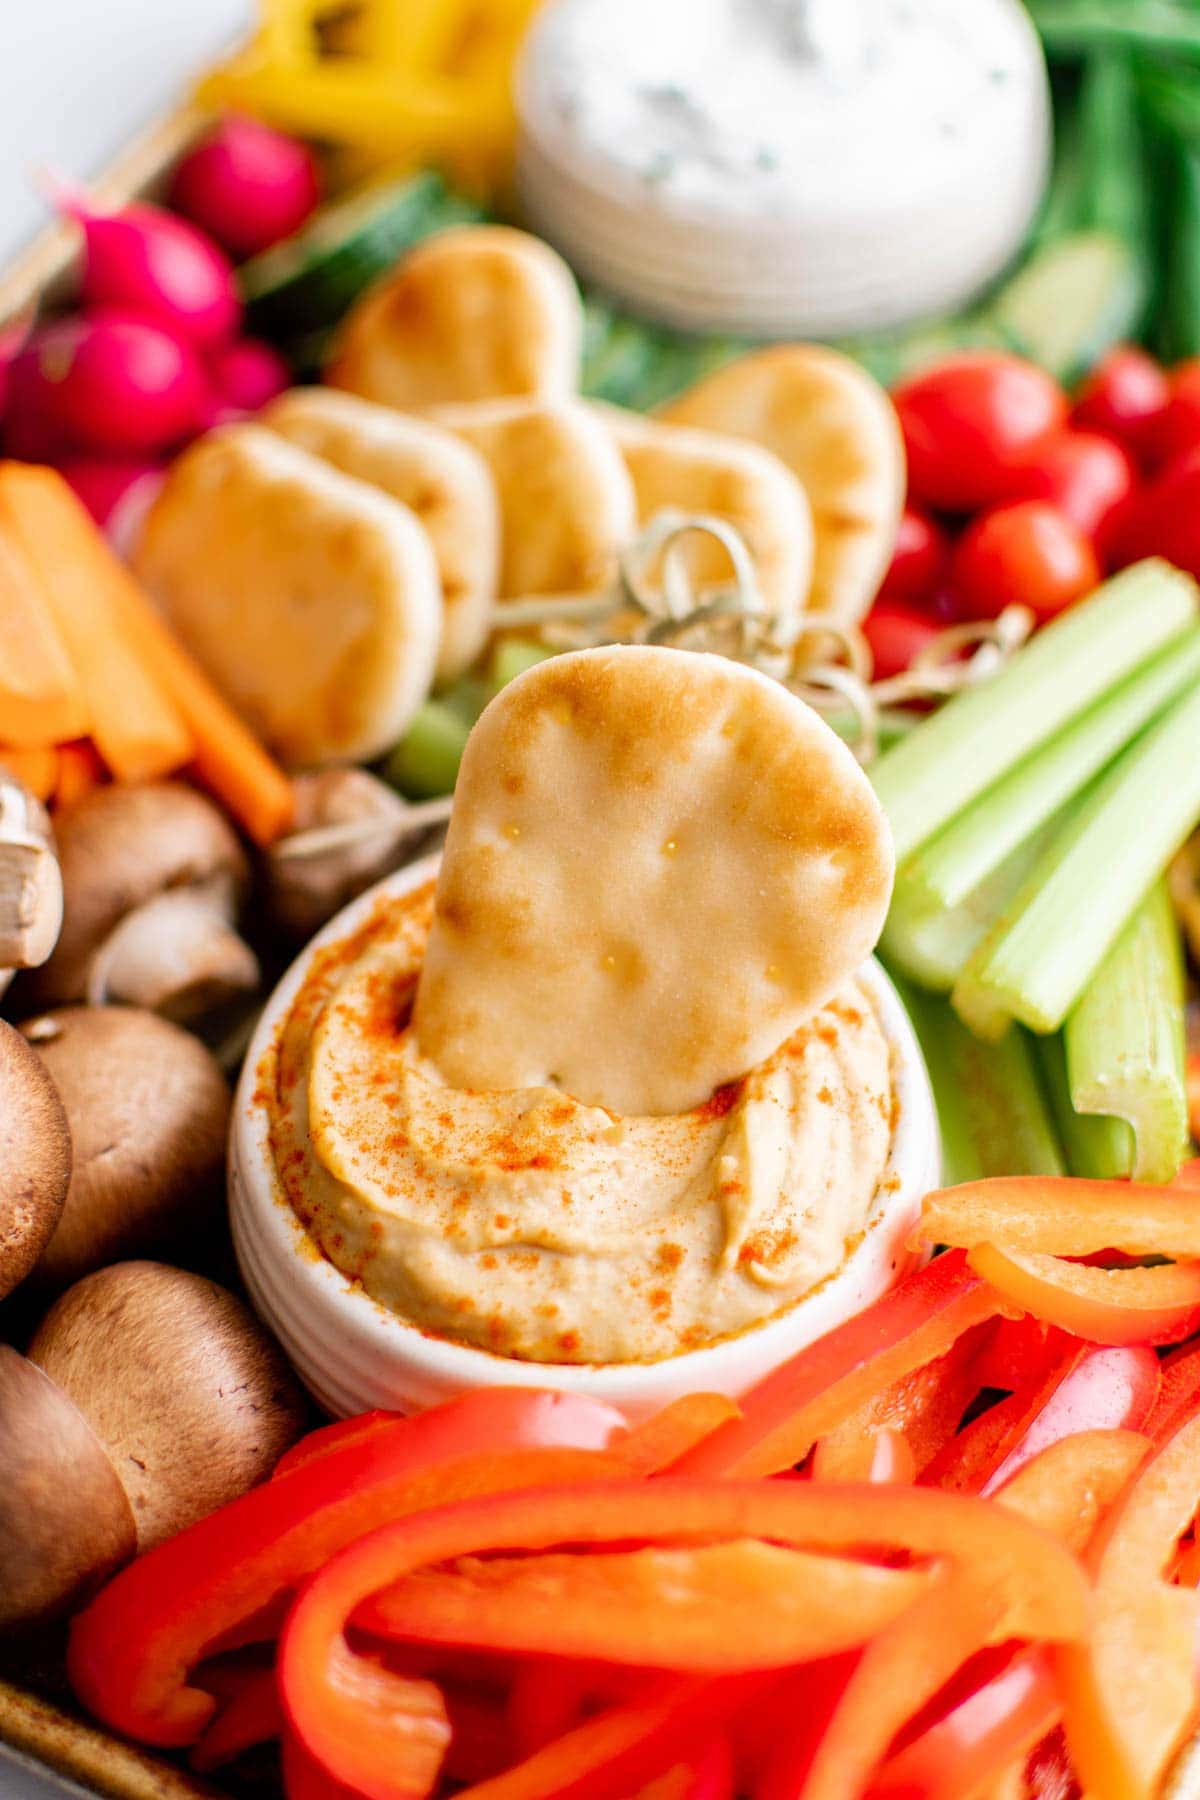 pita bread dipped in hummus surrounded by vegetables on a trray